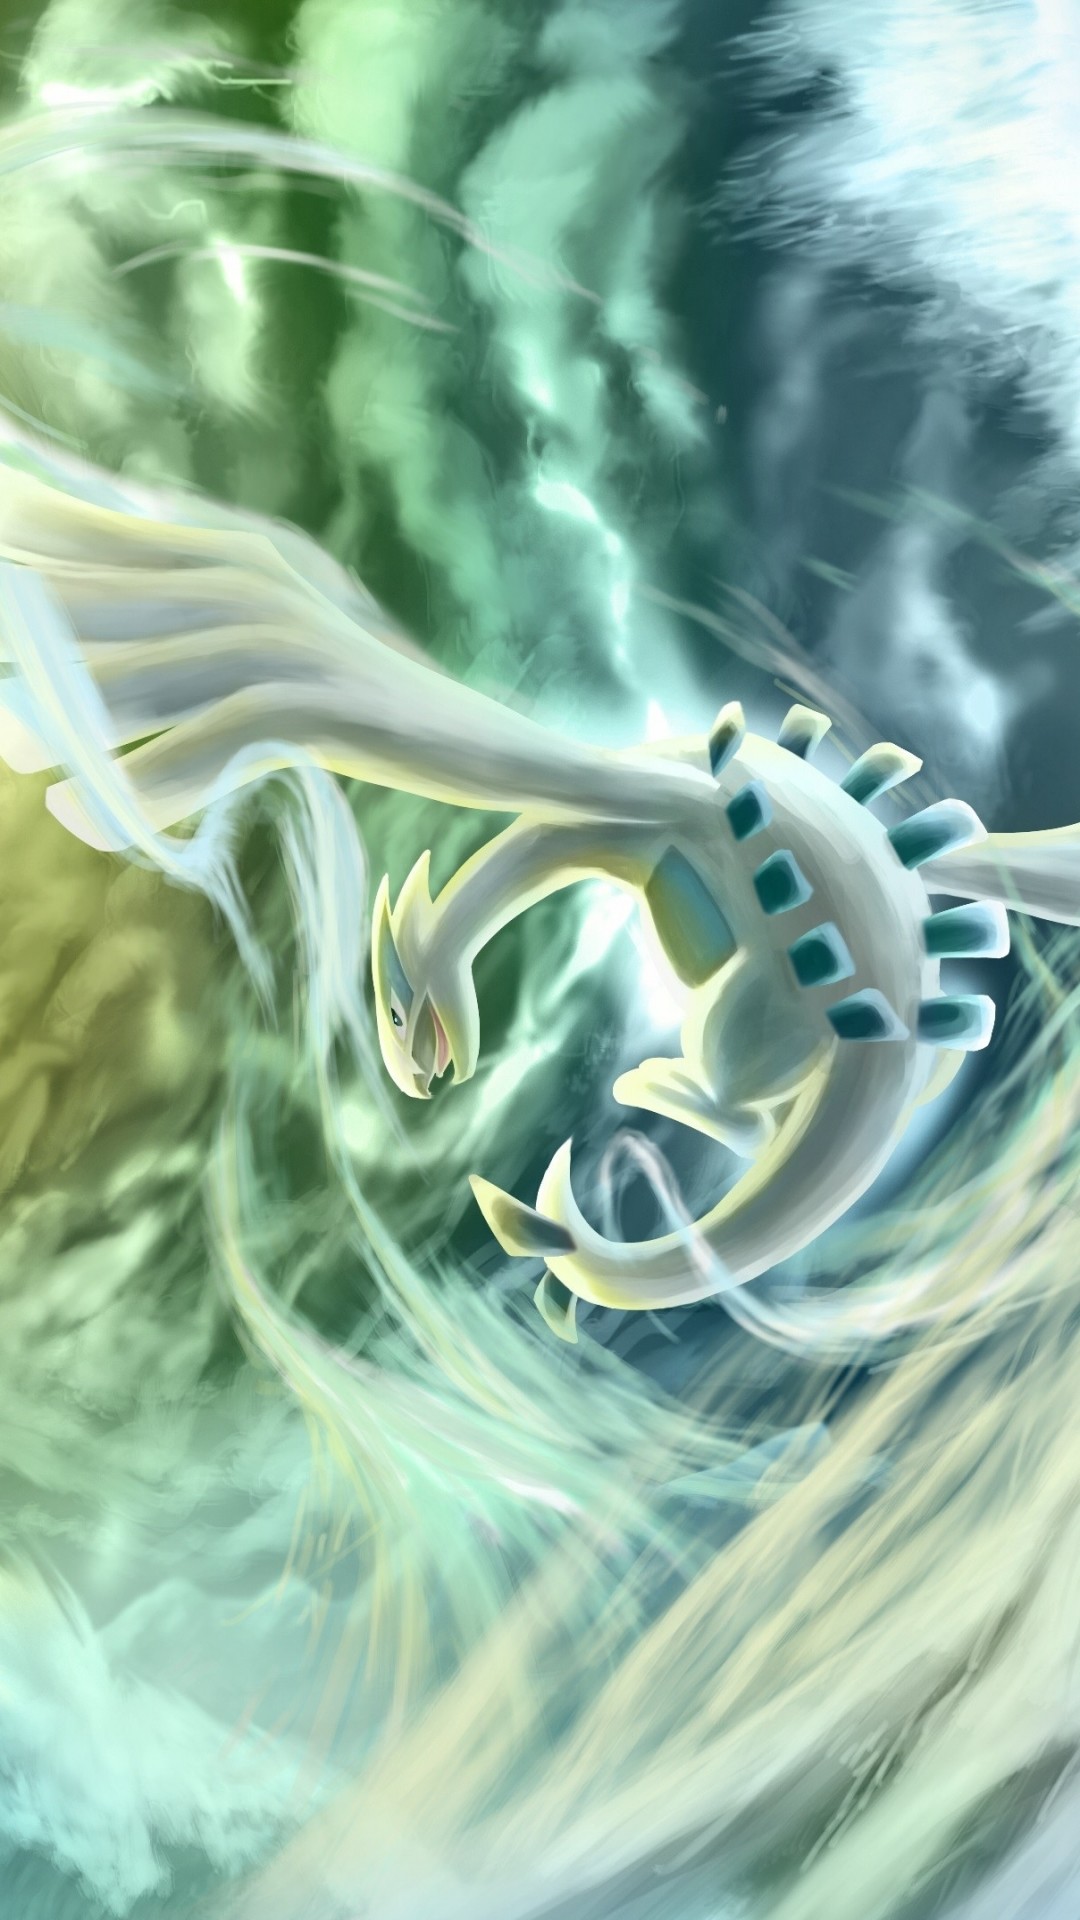 Lugia Pokemon Iphone Wallpapers Iphone Wallpapers